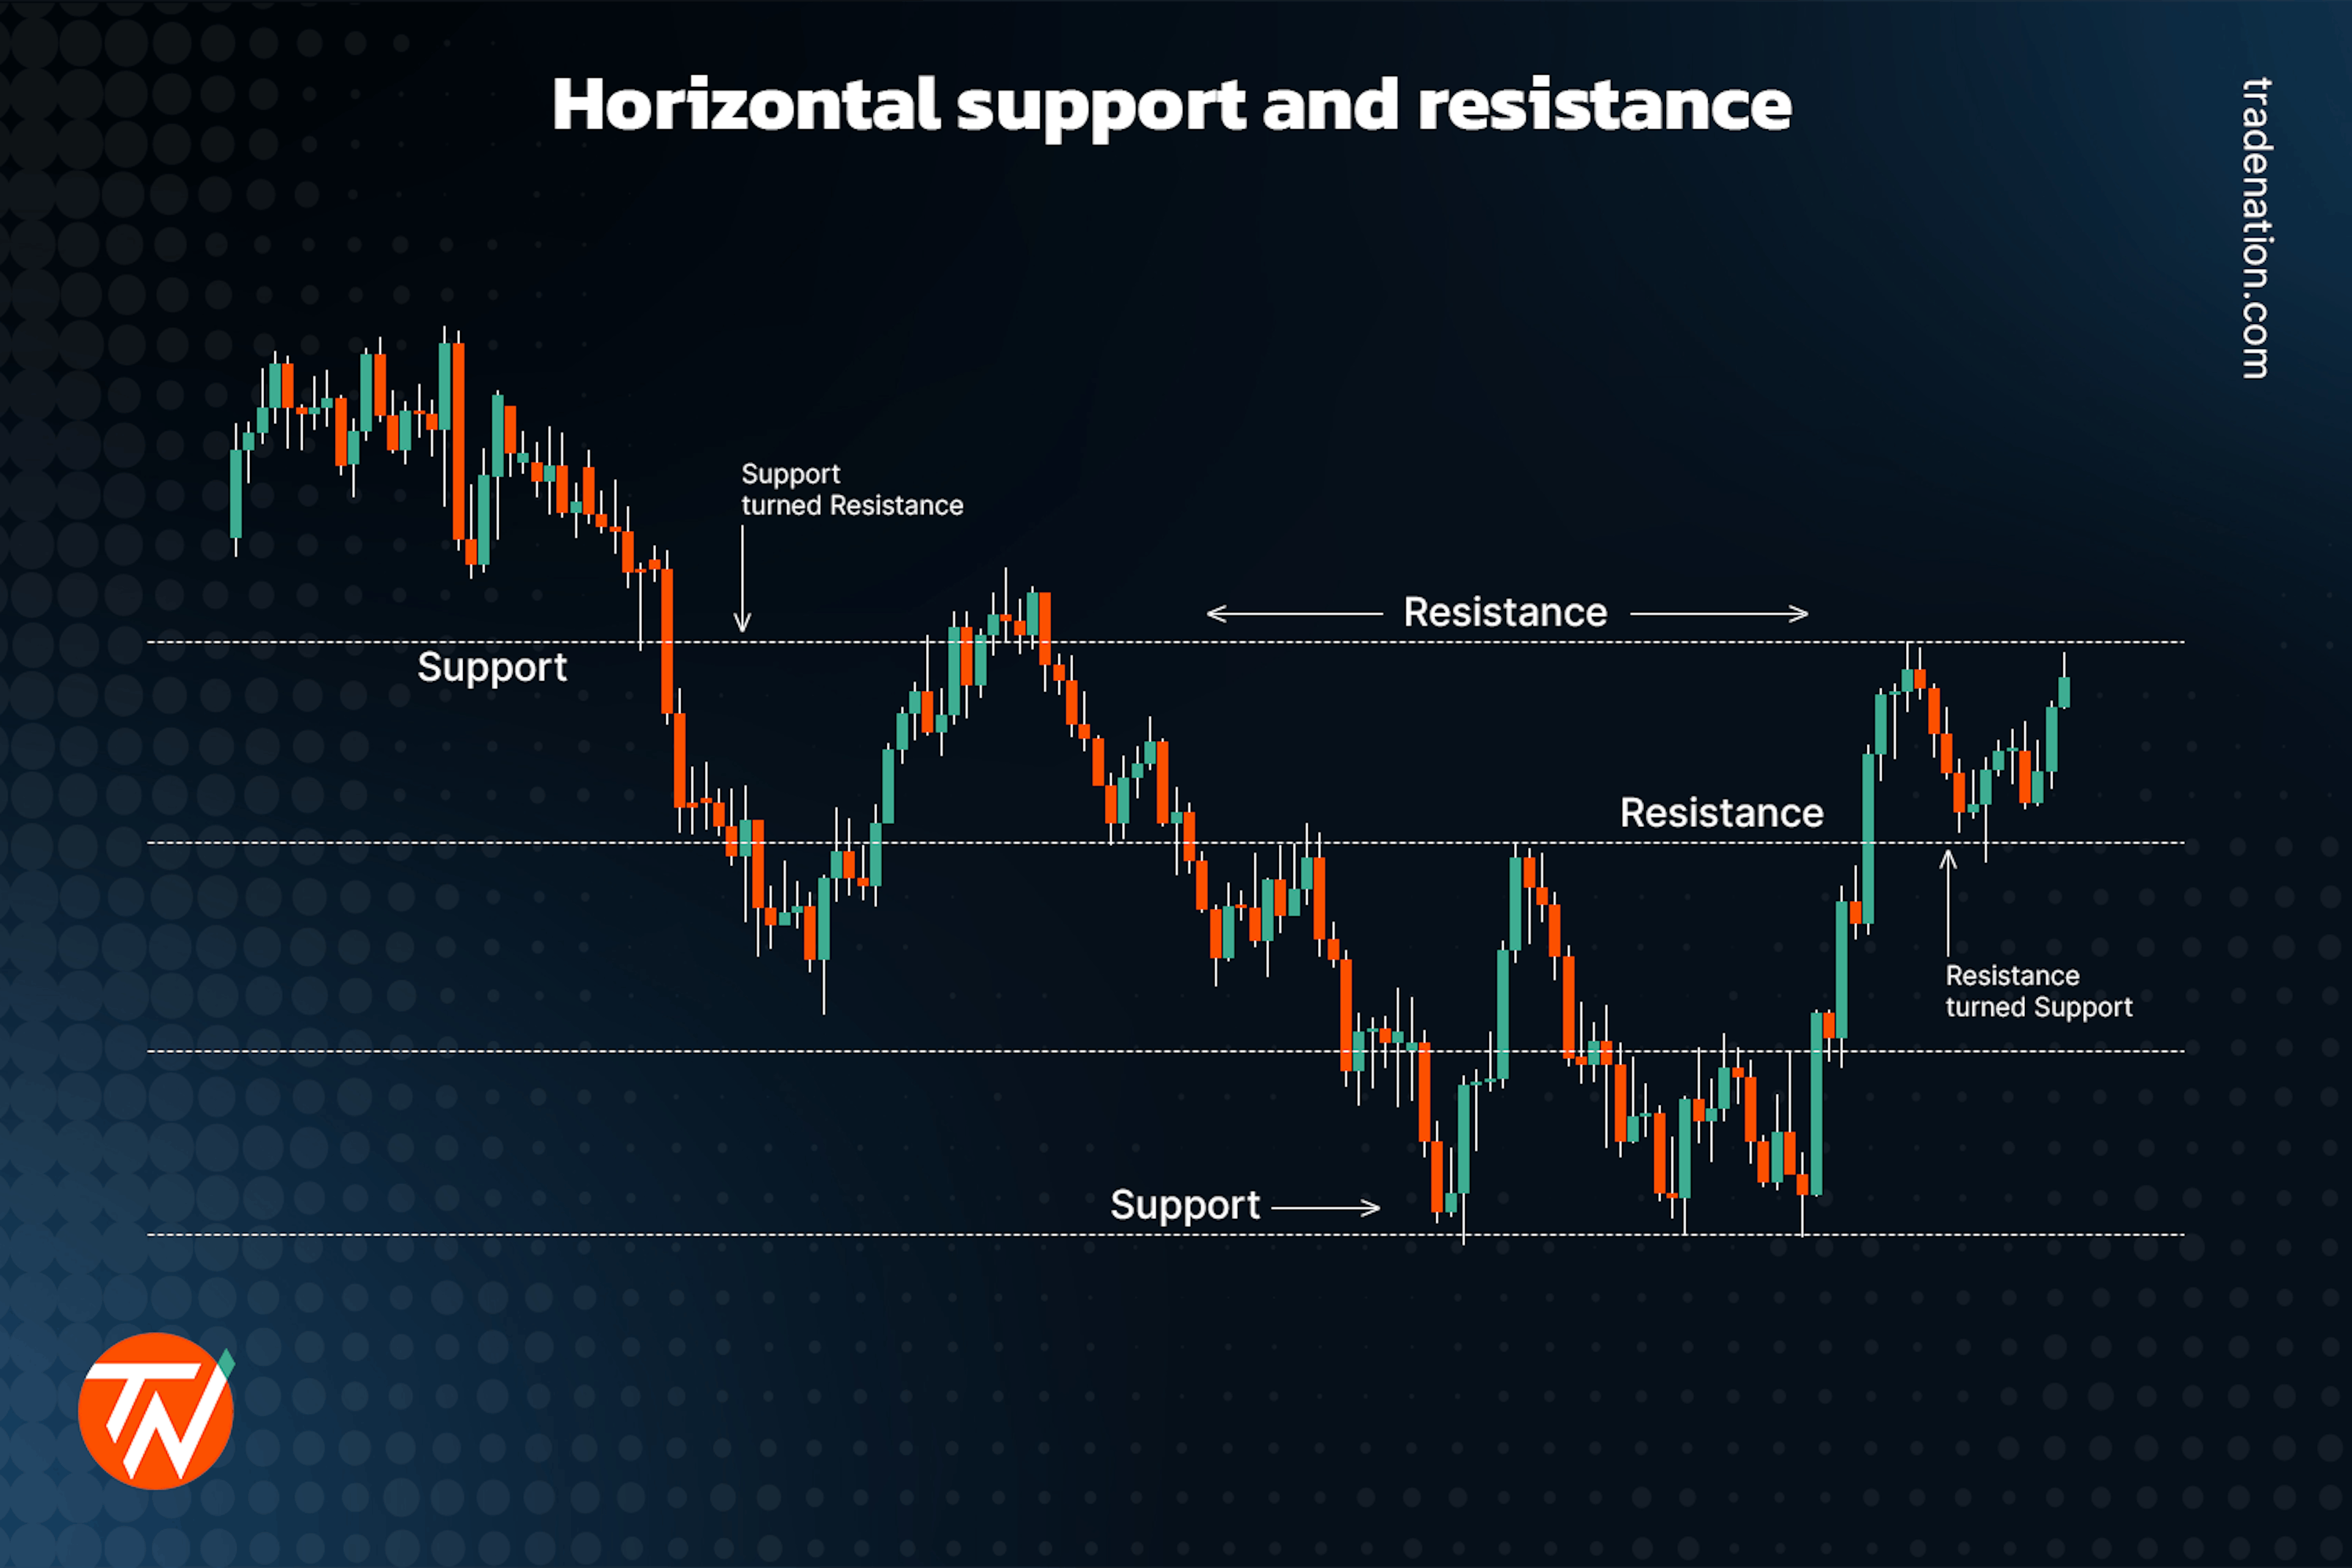 Horizontal support and resistance lines in trading